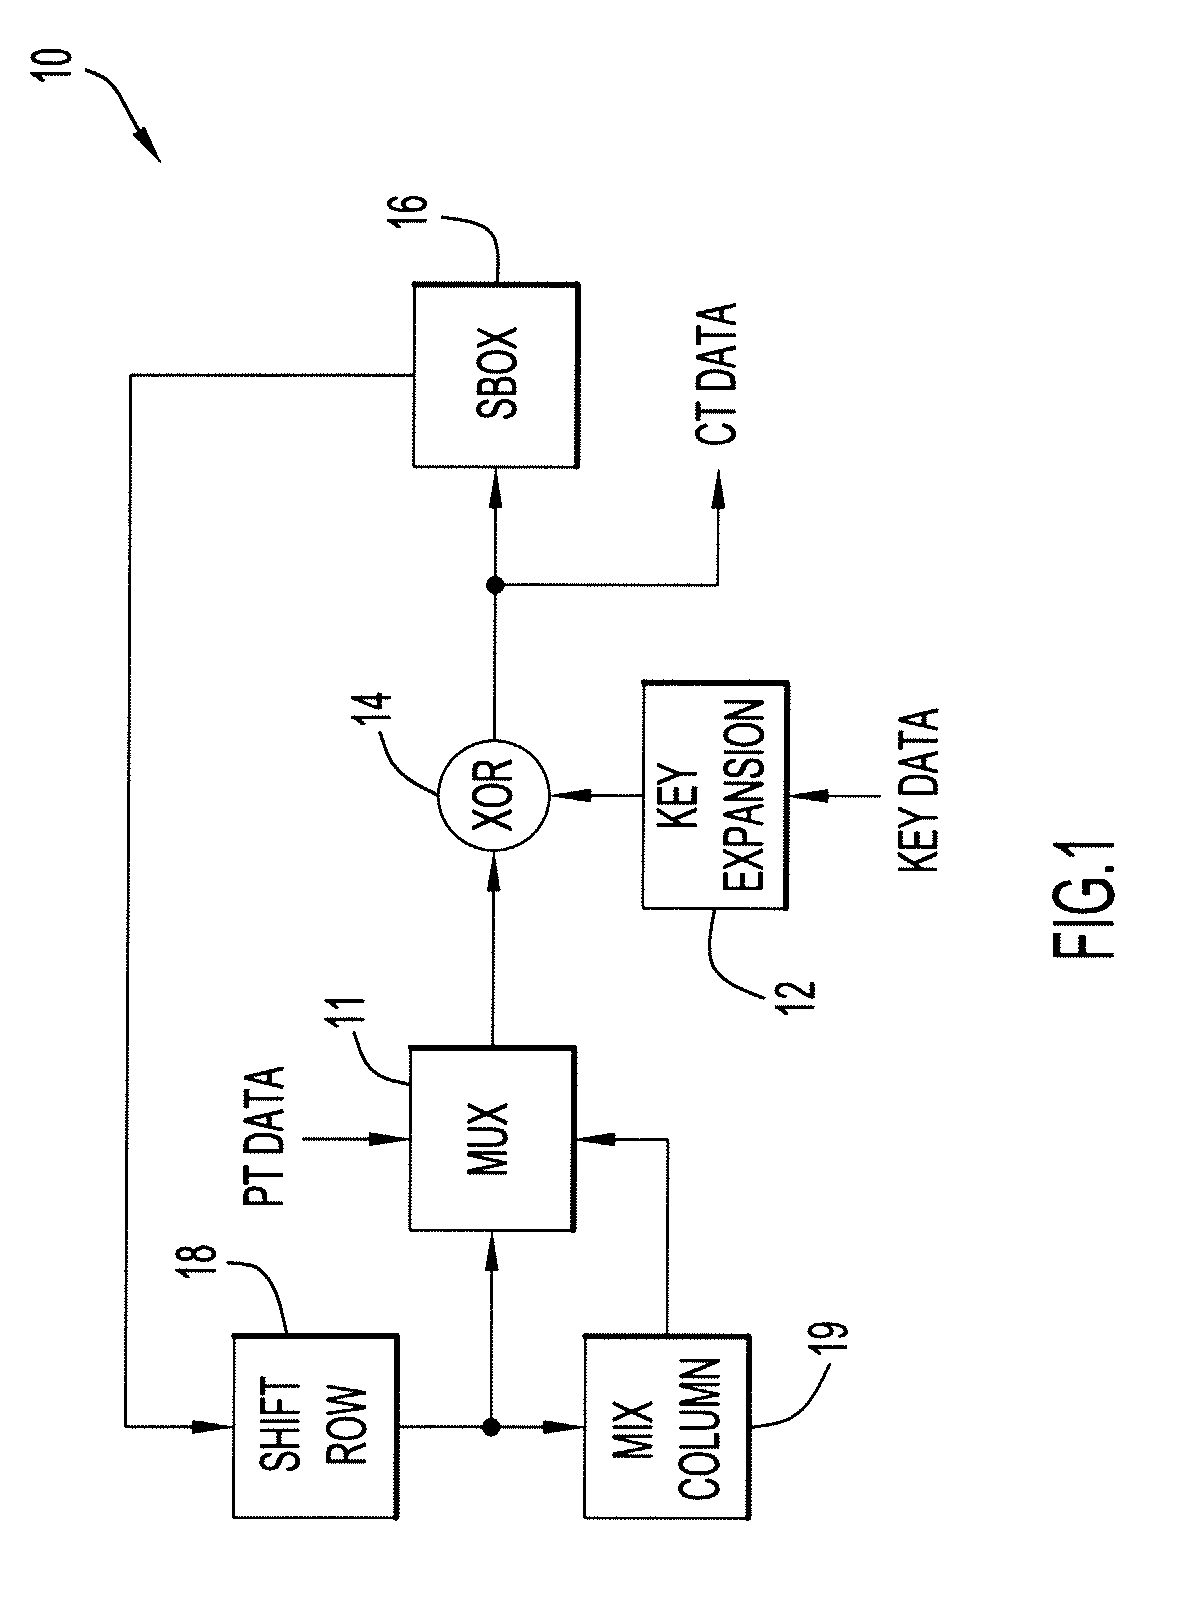 Method and Apparatus for Key Expansion to Encode Data